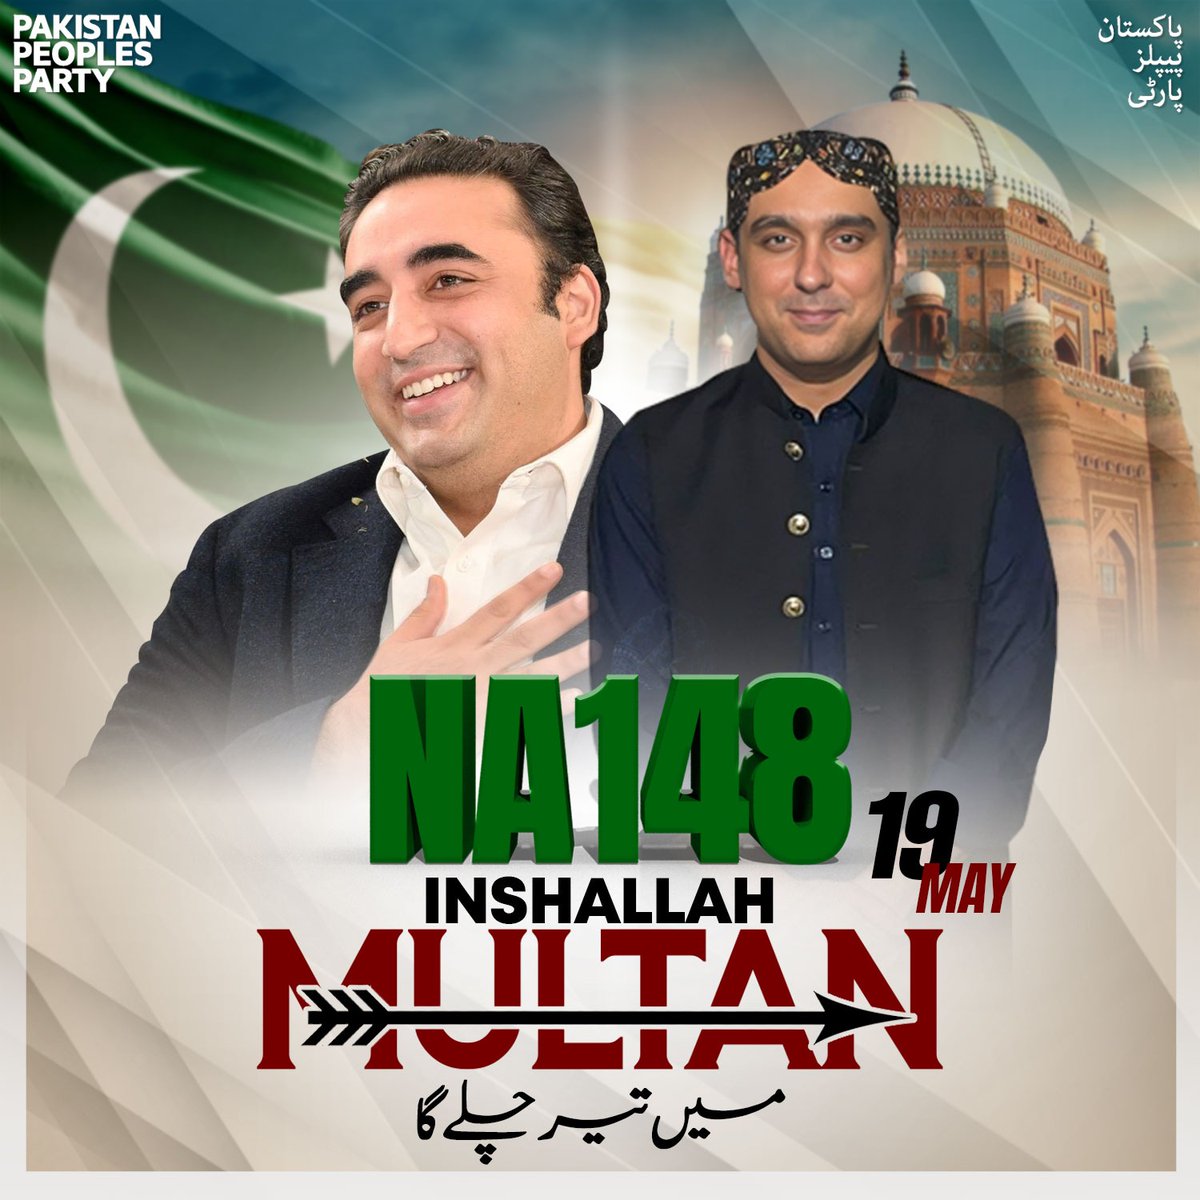 Conscious people of #Multan on May 19th in #NA148 polling ground make the People's Representative of People's Party successful by stamping the arrow sign, victory sign is arrow sign.
#VoteForTeer  @KasimGillani